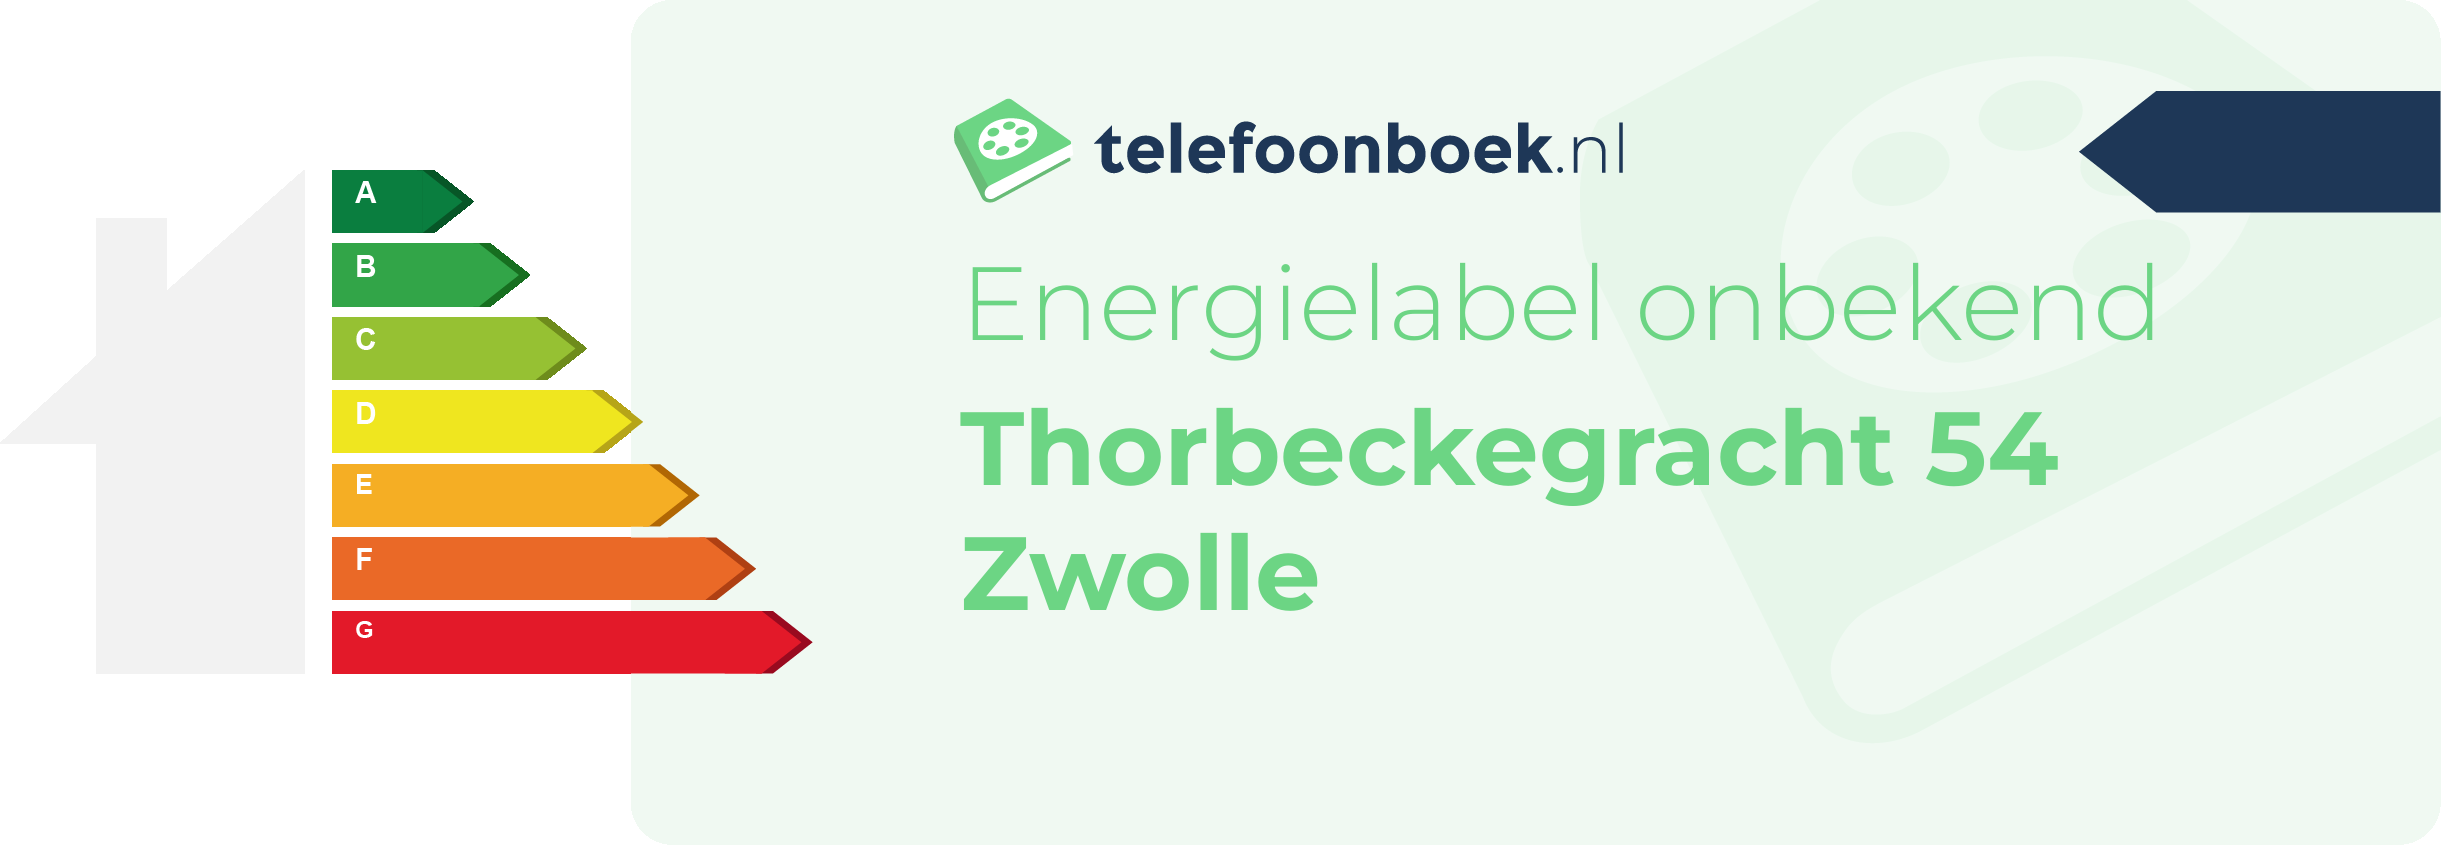 Energielabel Thorbeckegracht 54 Zwolle